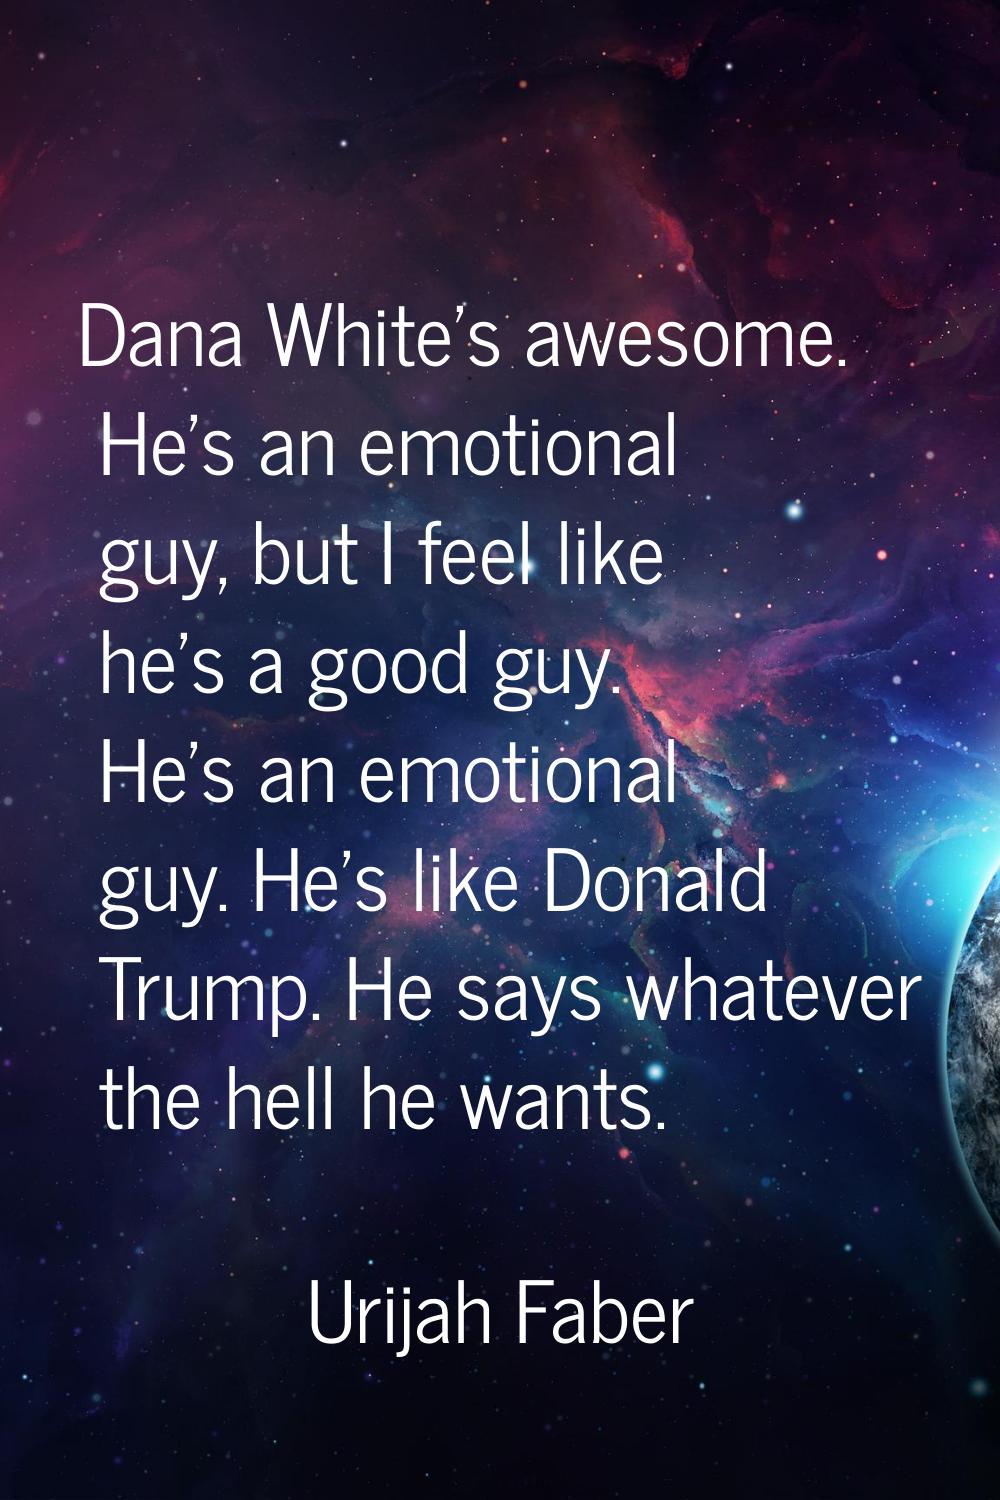 Dana White's awesome. He's an emotional guy, but I feel like he's a good guy. He's an emotional guy